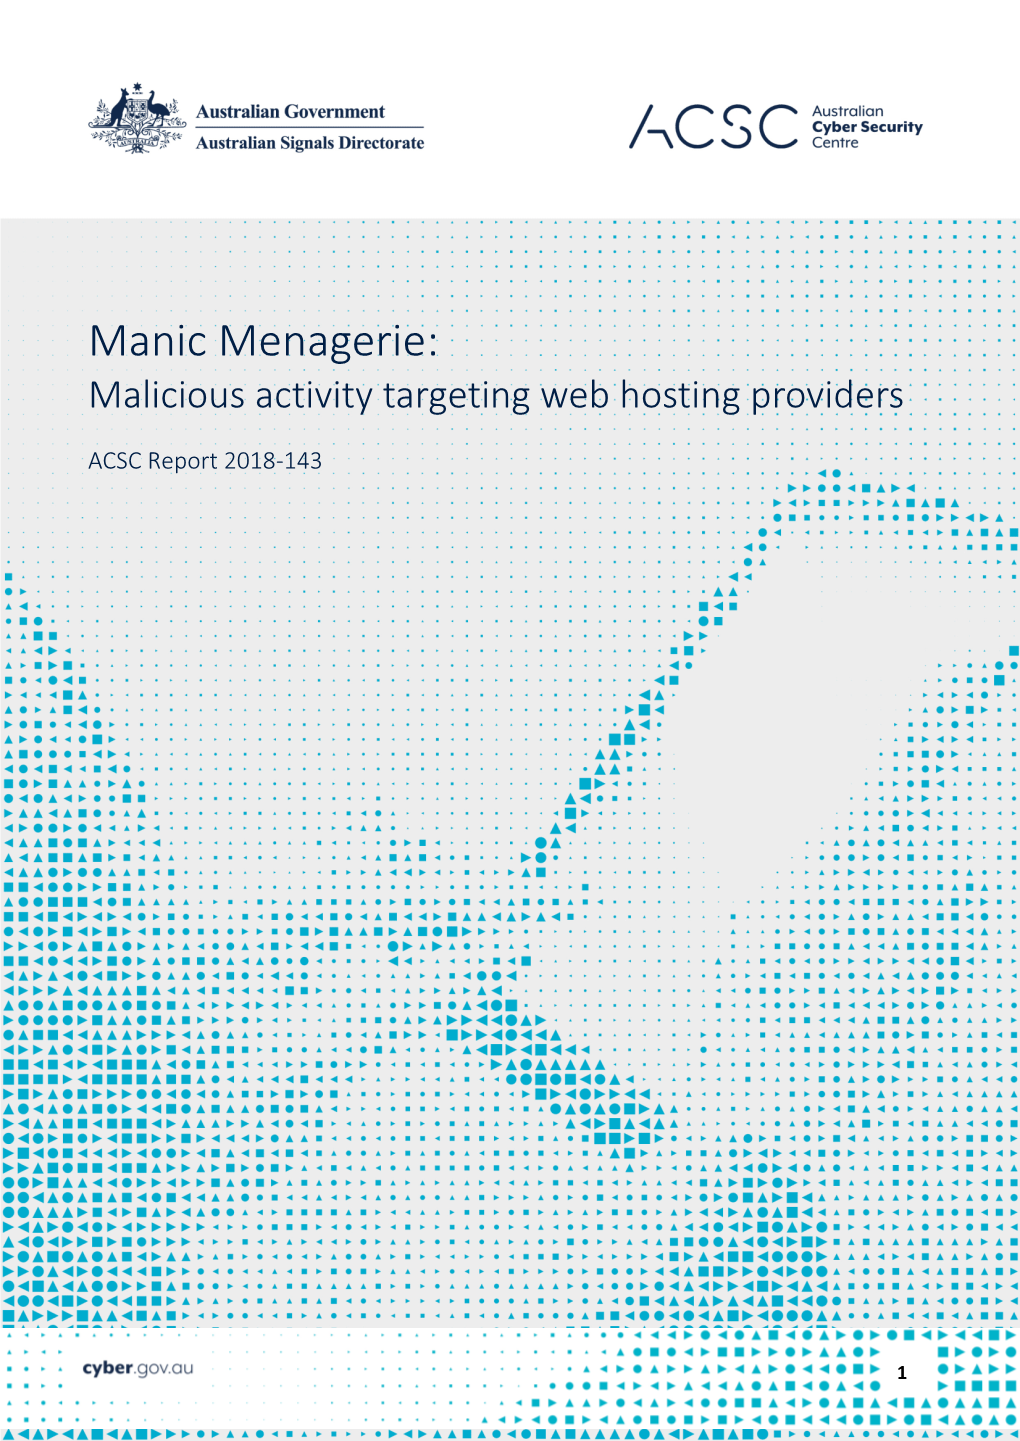 Manic Menagerie: Malicious Activity Targeting Web Hosting Providers